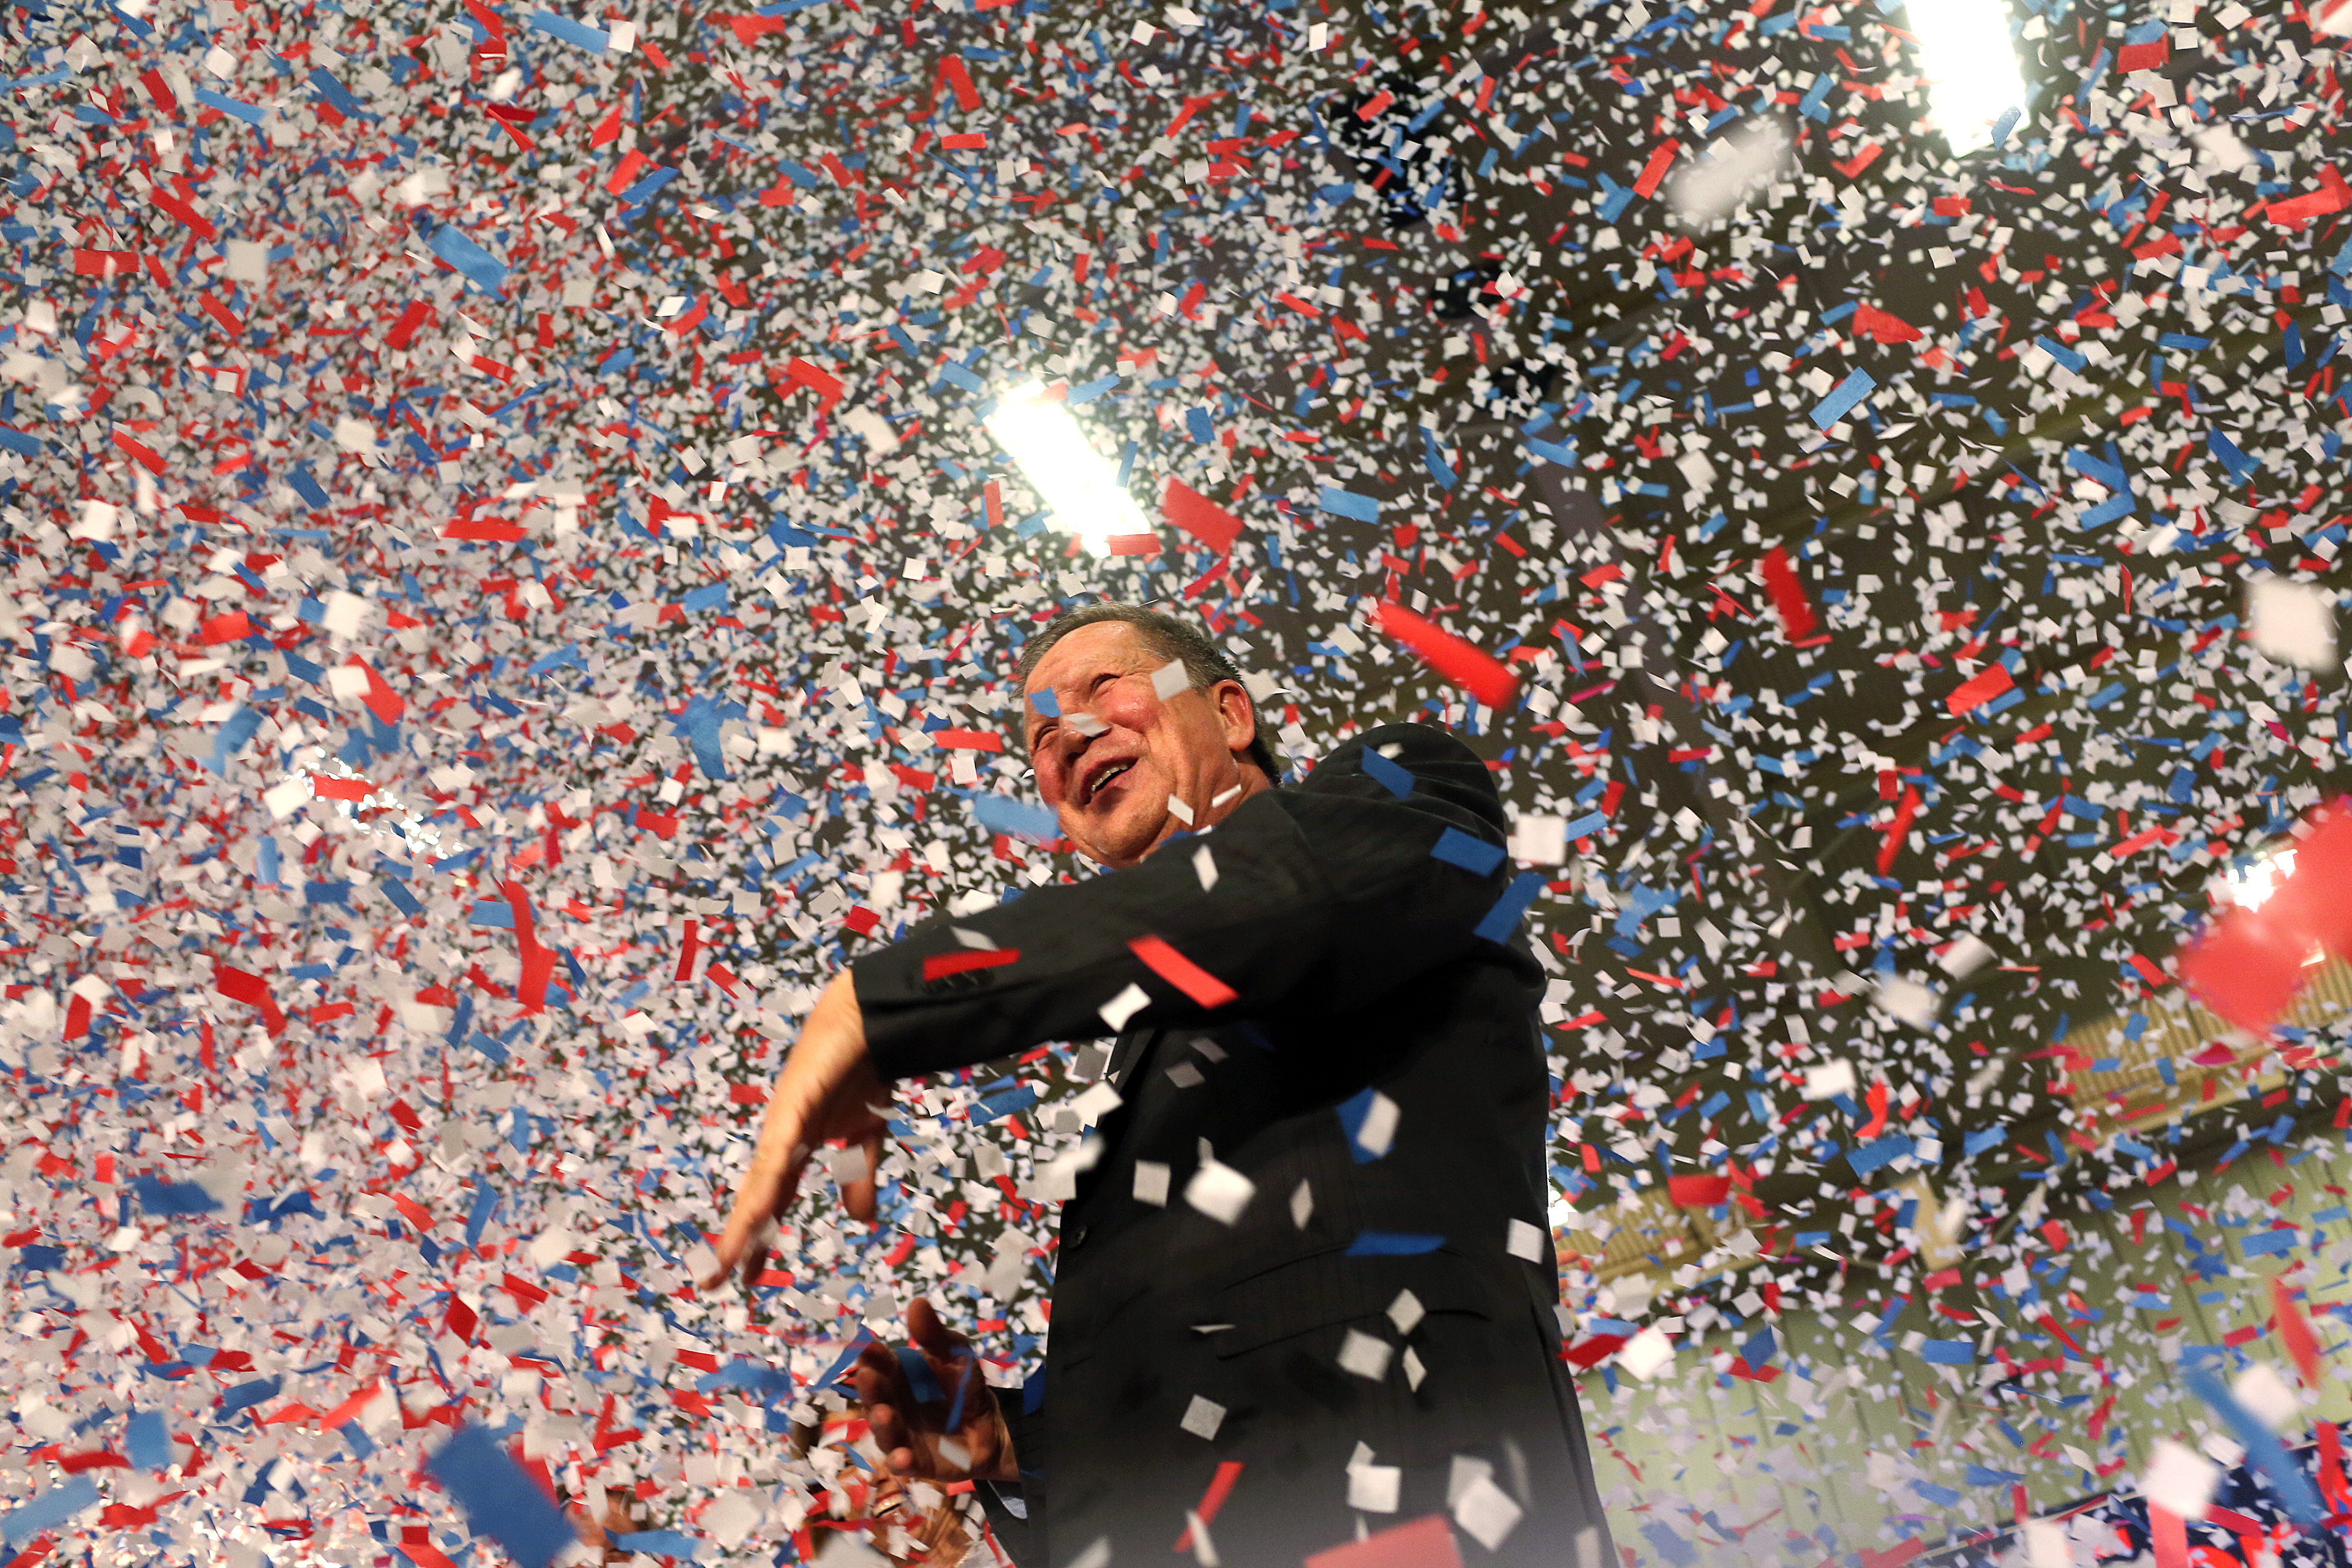 Republican presidential candidate, Ohio Gov. John Kasich waves confetti out of his way after giving his victory speech at Baldwin-Wallace University in Berea, Ohio on March 15, 2016. (Andrew Spear for TIME)